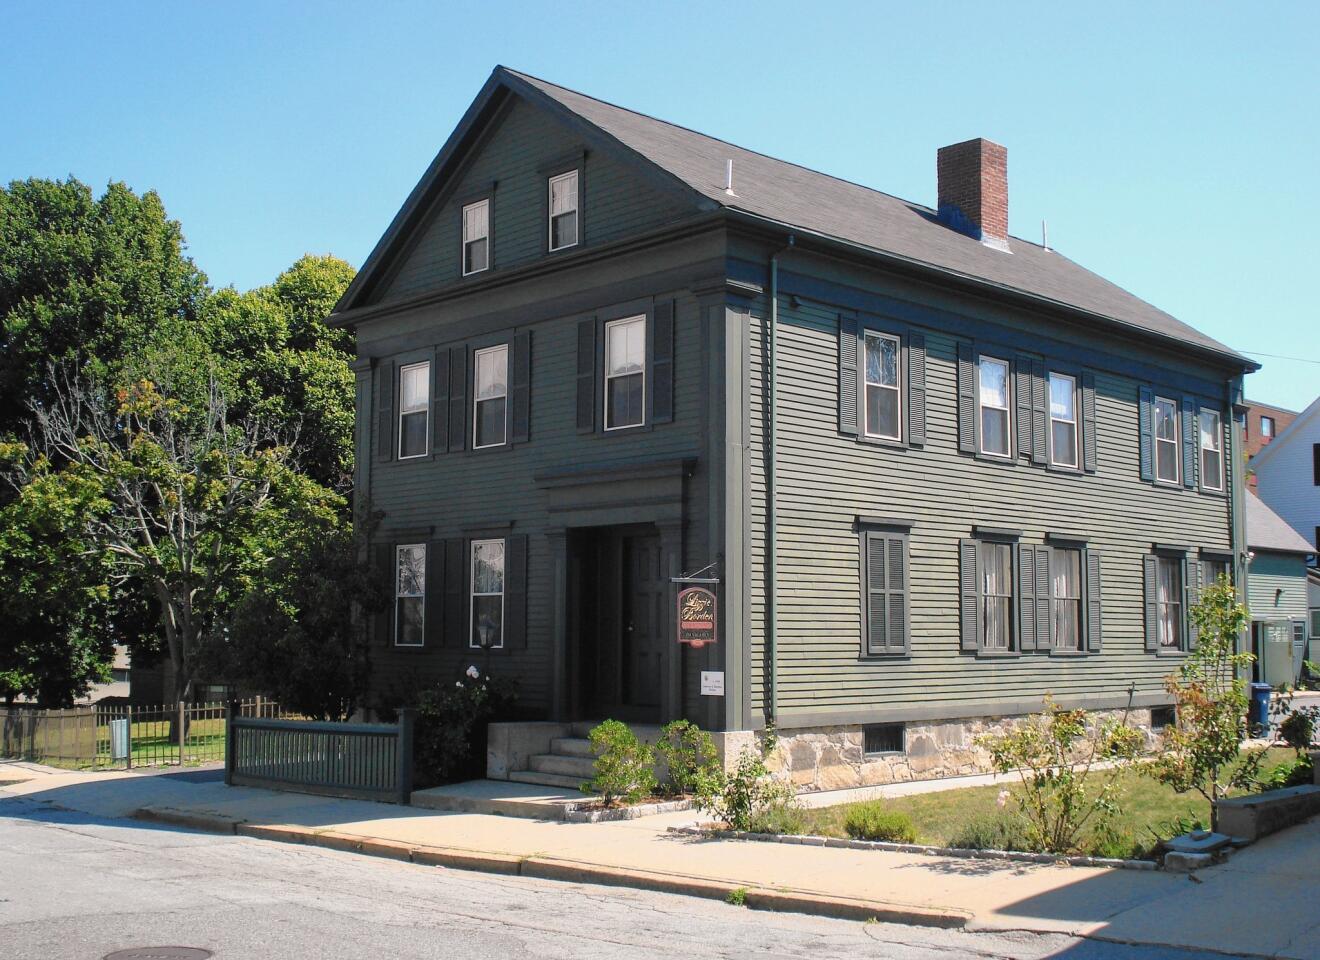 The Borden home on Second Street, where the slayings occurred, is now a bed and breakfast.